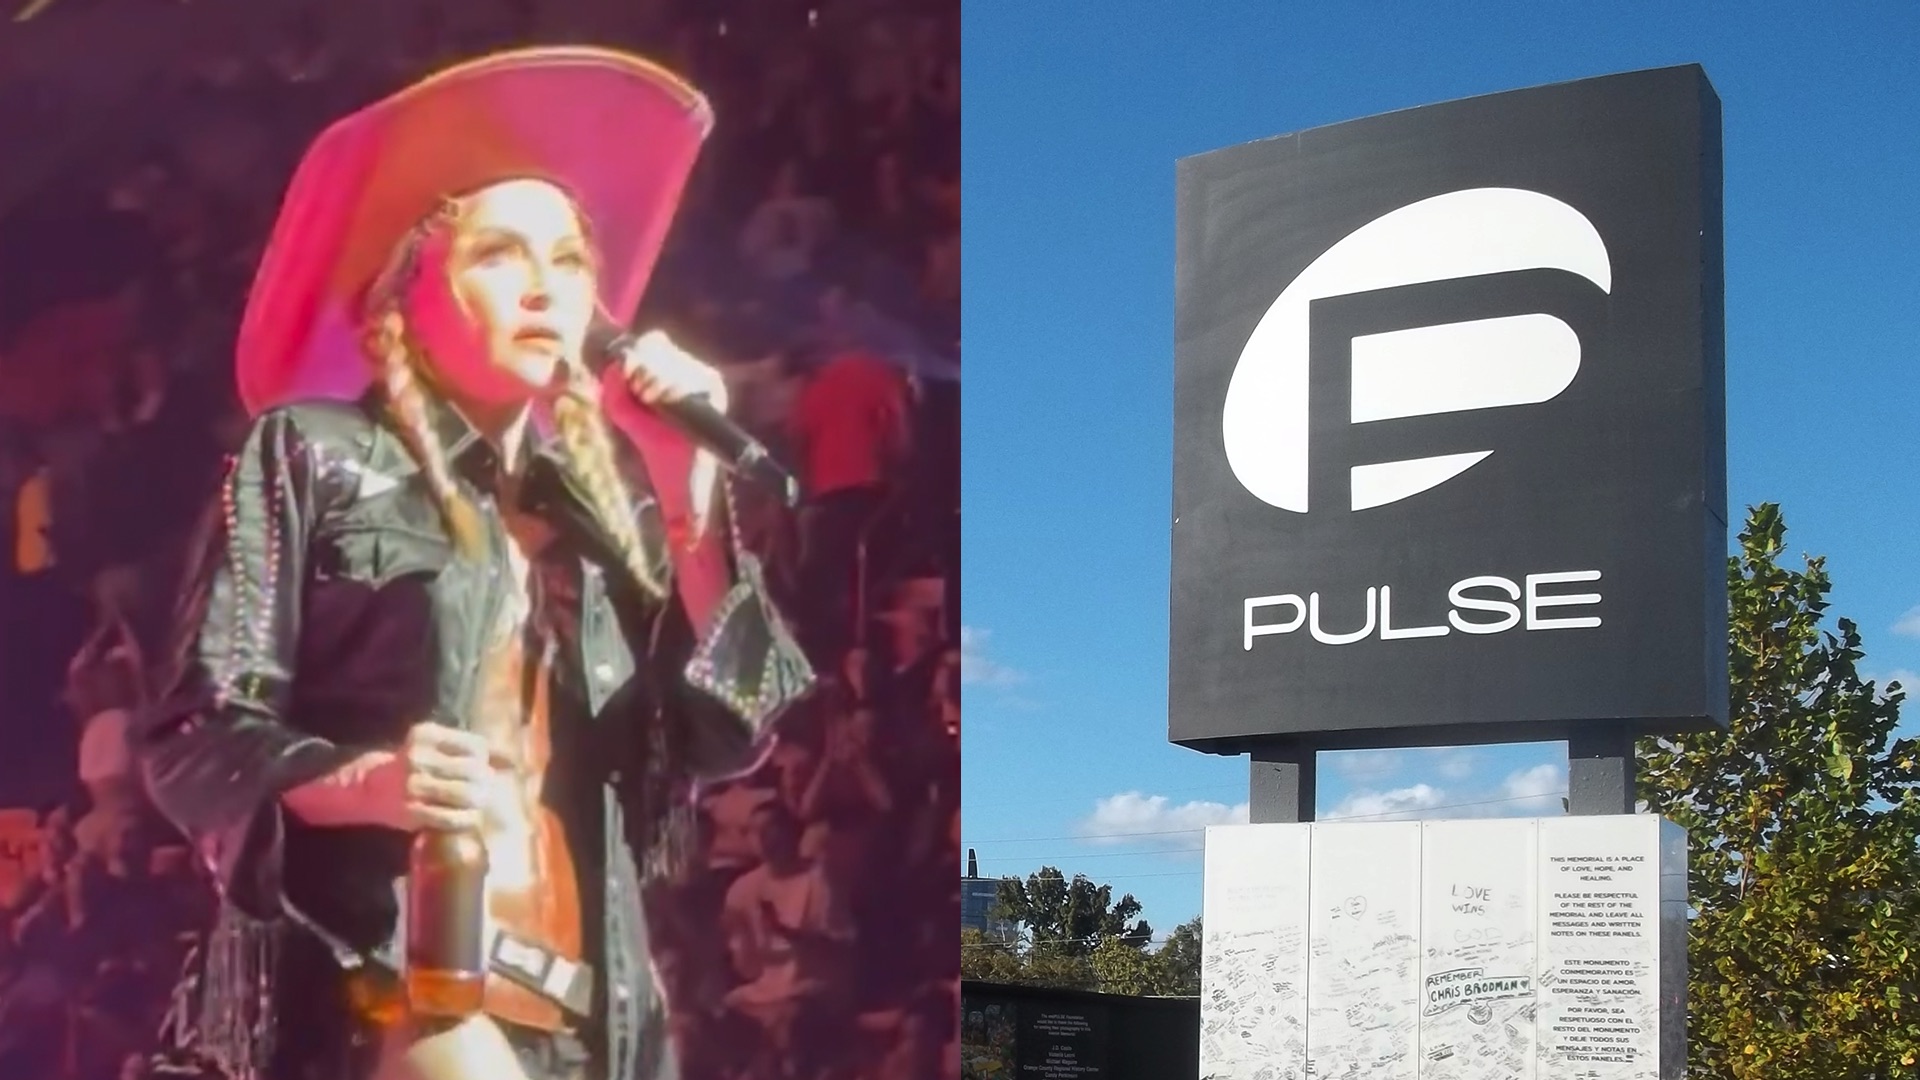 Madonna pays tribute to the victims of the Pulse nightclub shooting